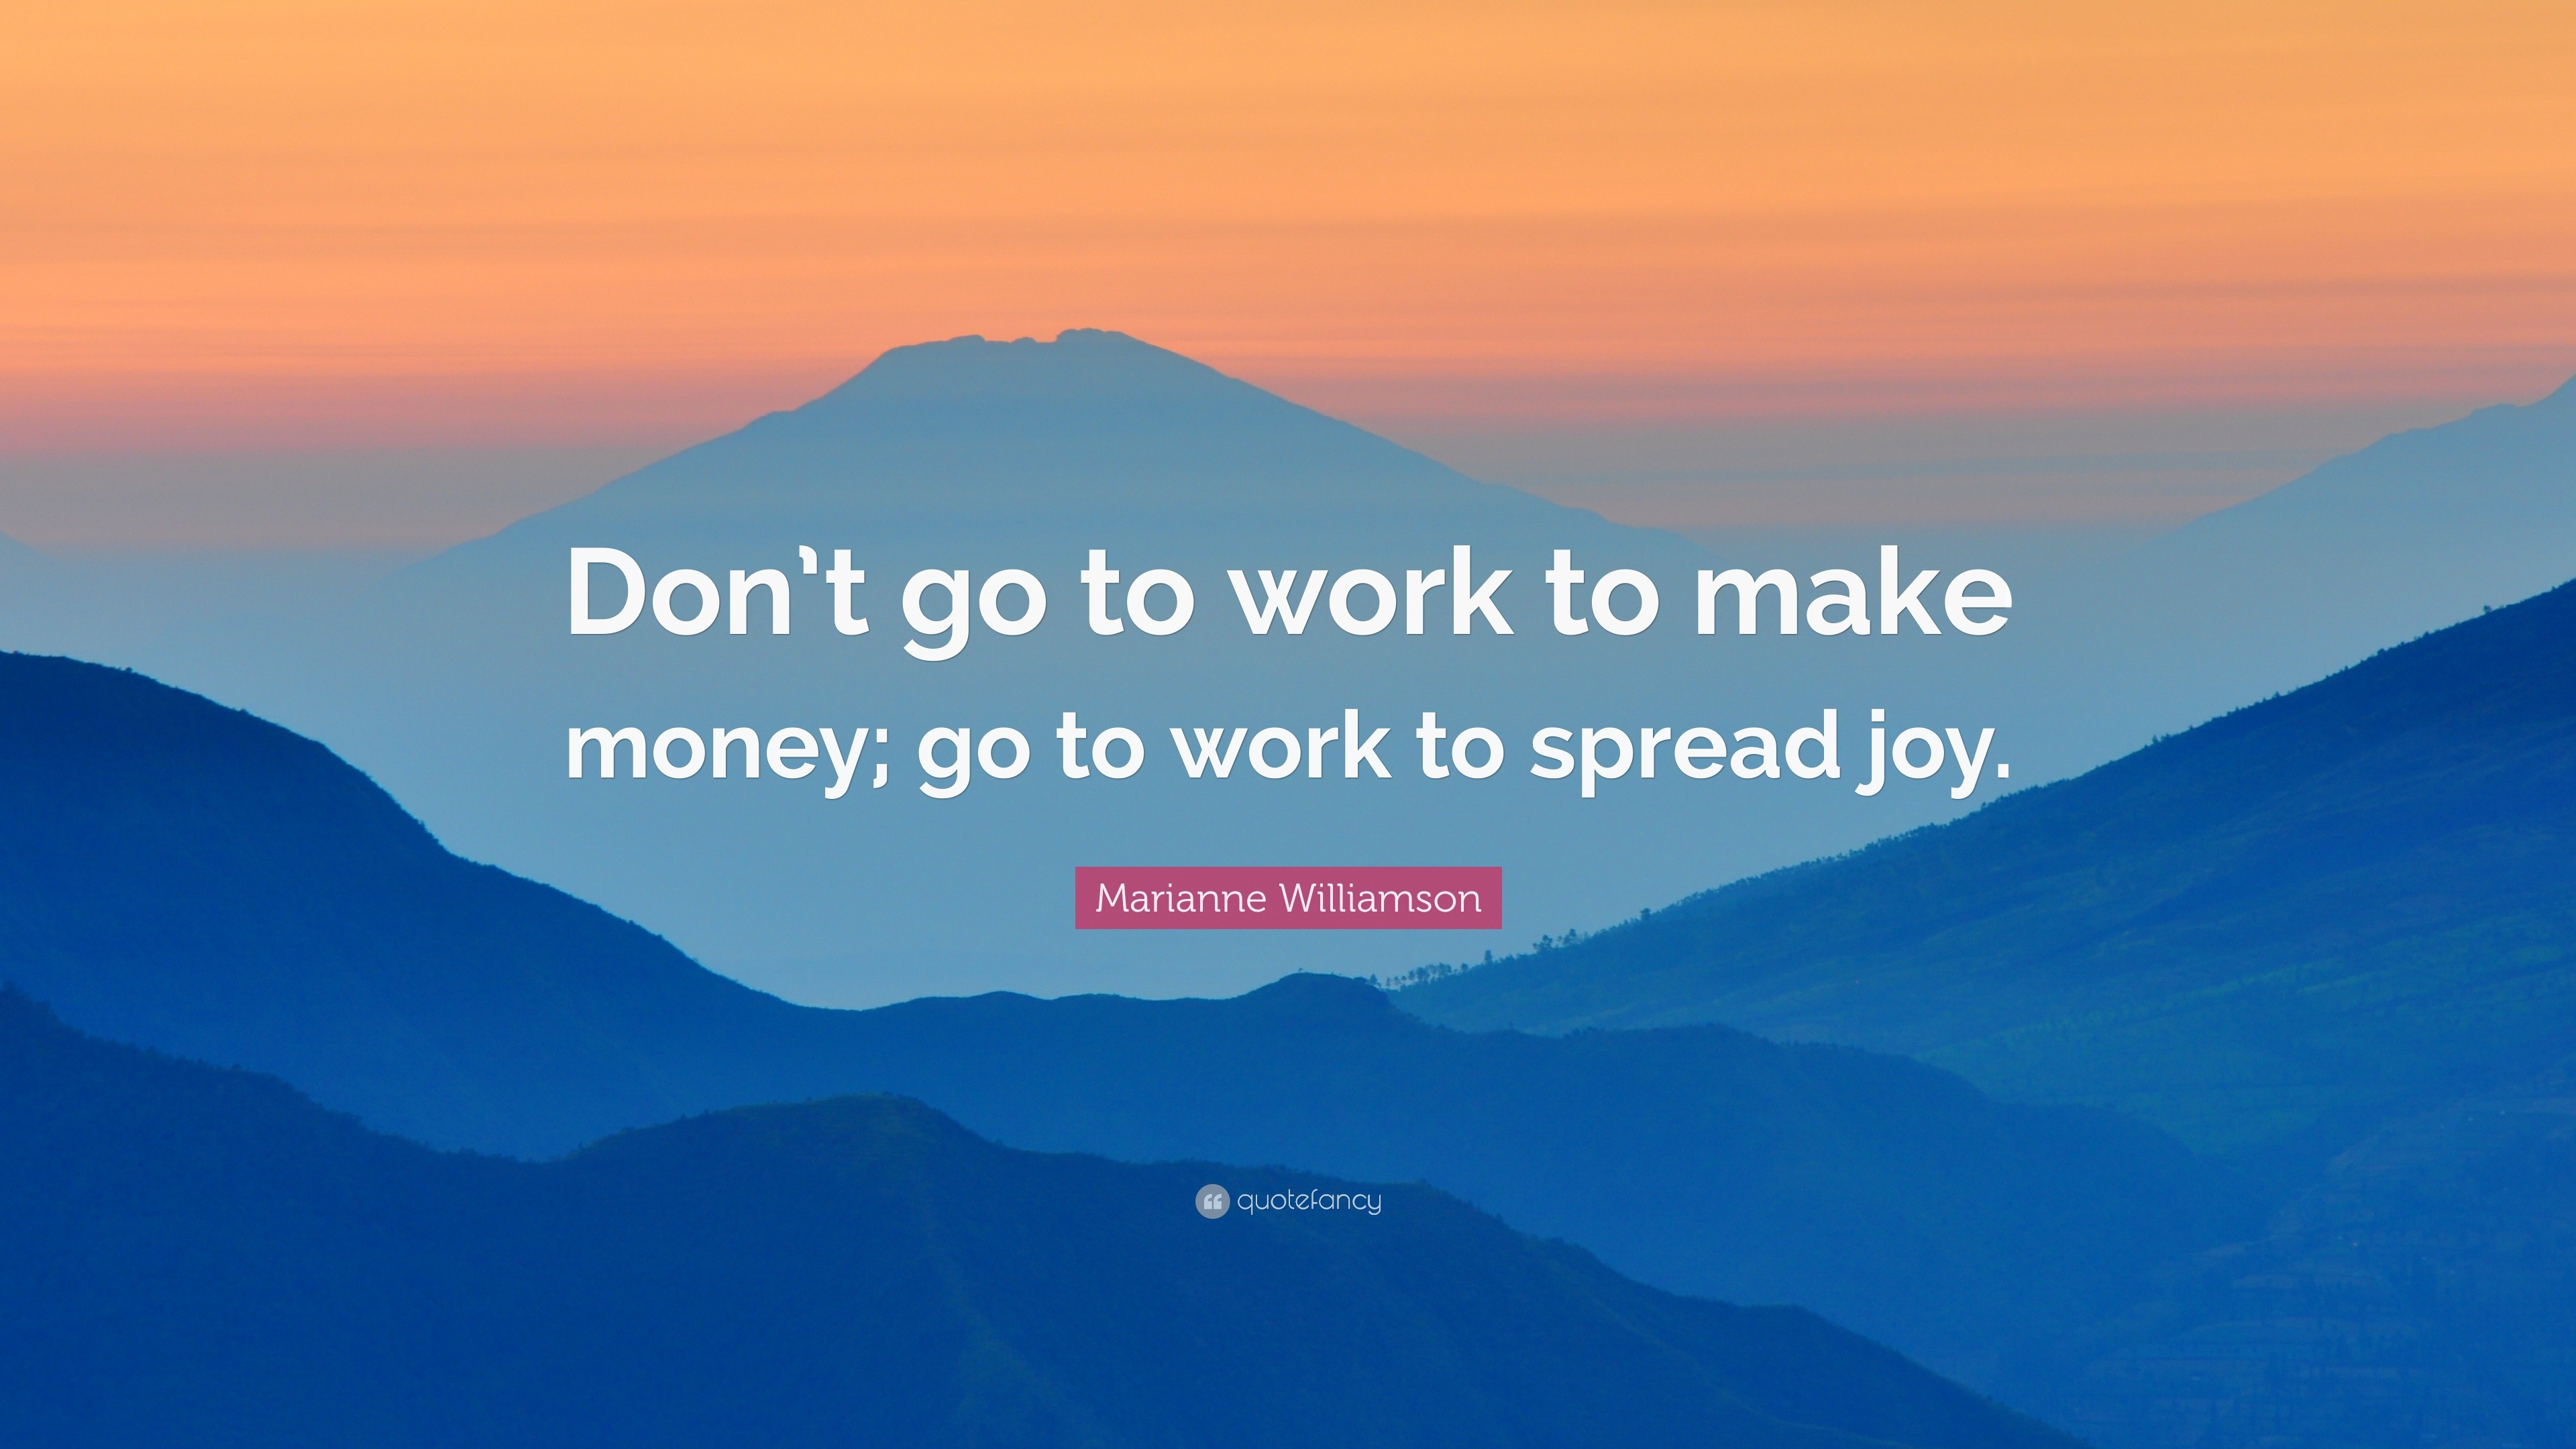 Making Money Quotes (40 Wallpapers) - Quotefancy